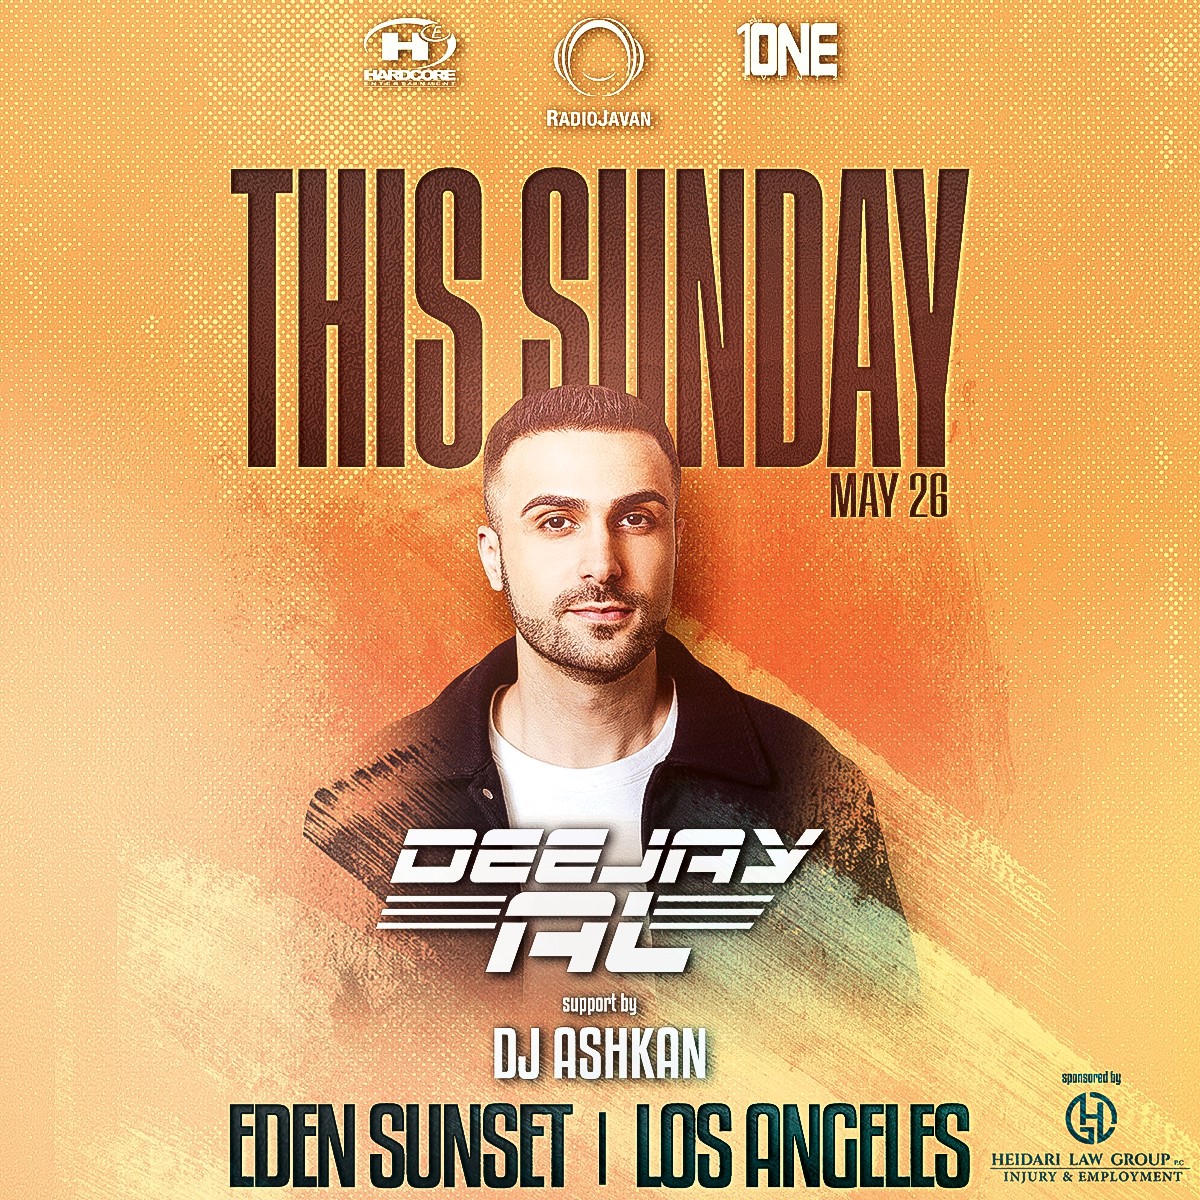 Memorial Day Wknd Party in Los Angeles feat DEEJAY AL Sunday, May 26 2024 @ Eden Sunset on May 26, 22:00@EDEN SUNSET - Buy tickets and Get information on HARDCORE & PLUS ONE tixhollywood.com